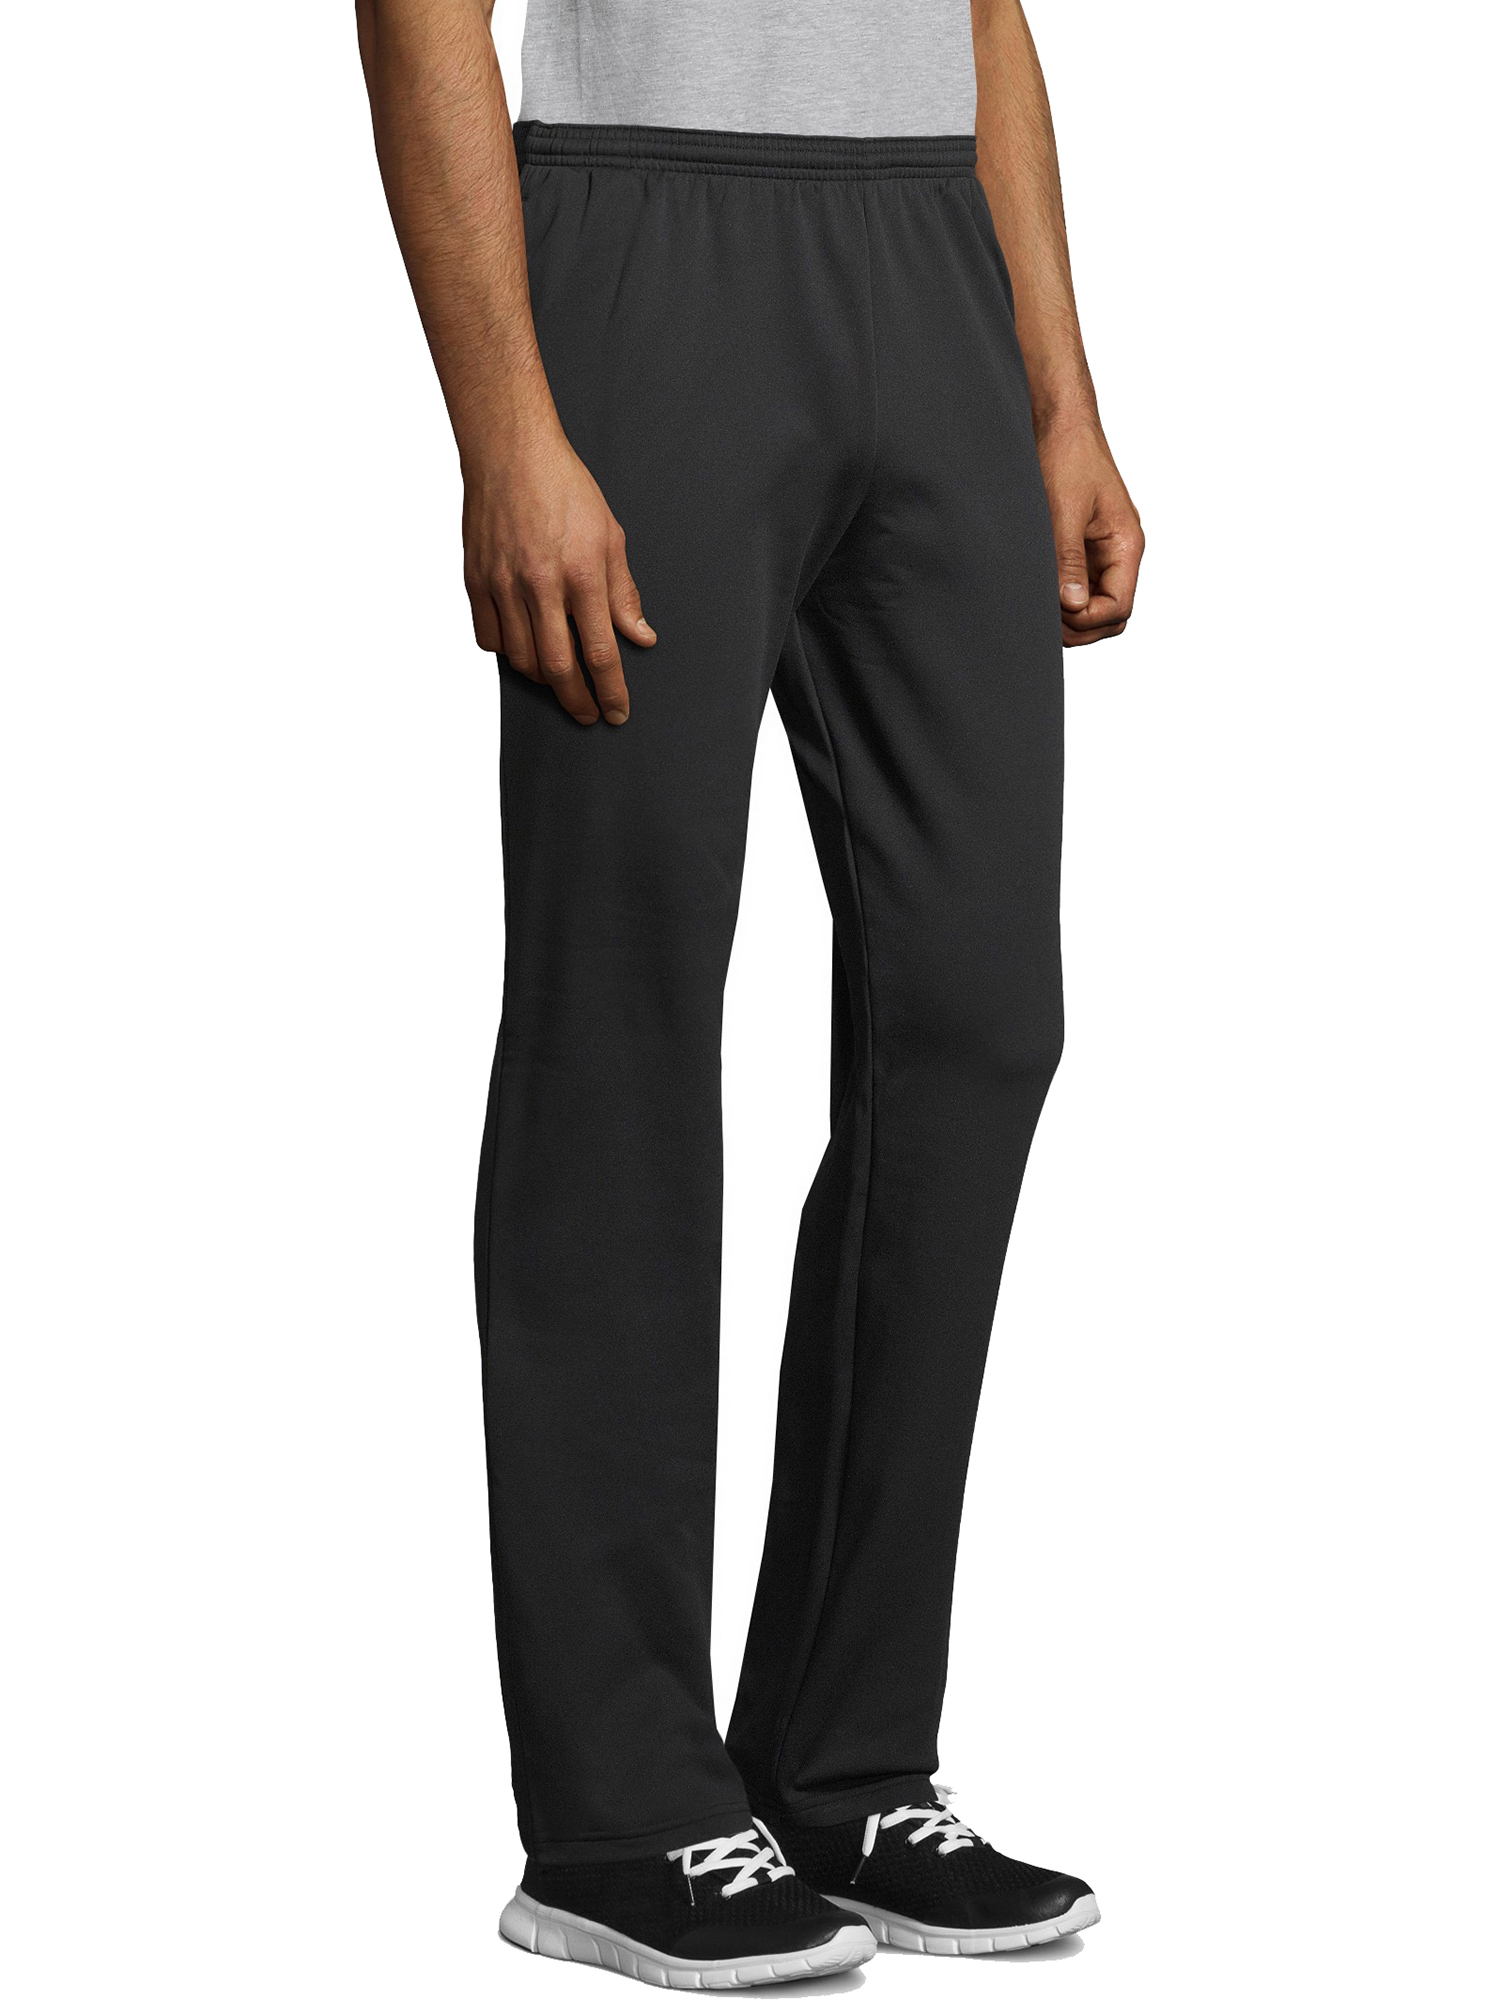 Hanes Sport Men's and Big Men's Performance Sweatpants with Pockets, Up to Size 2XL - image 2 of 5